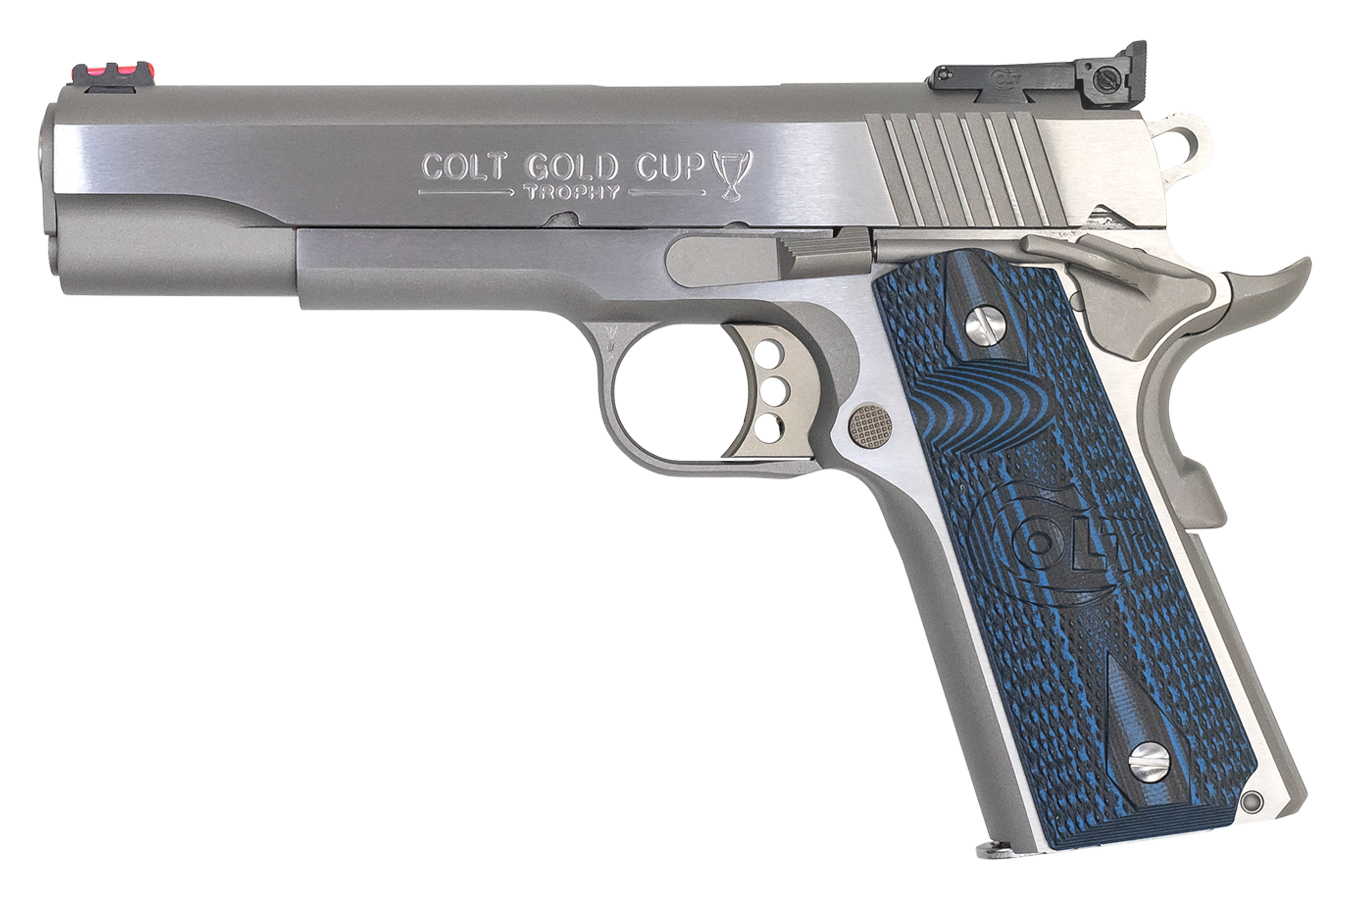 Colt 1911 Gold Cup Trophy 38 Super Stainless Pistol with G10 Grips